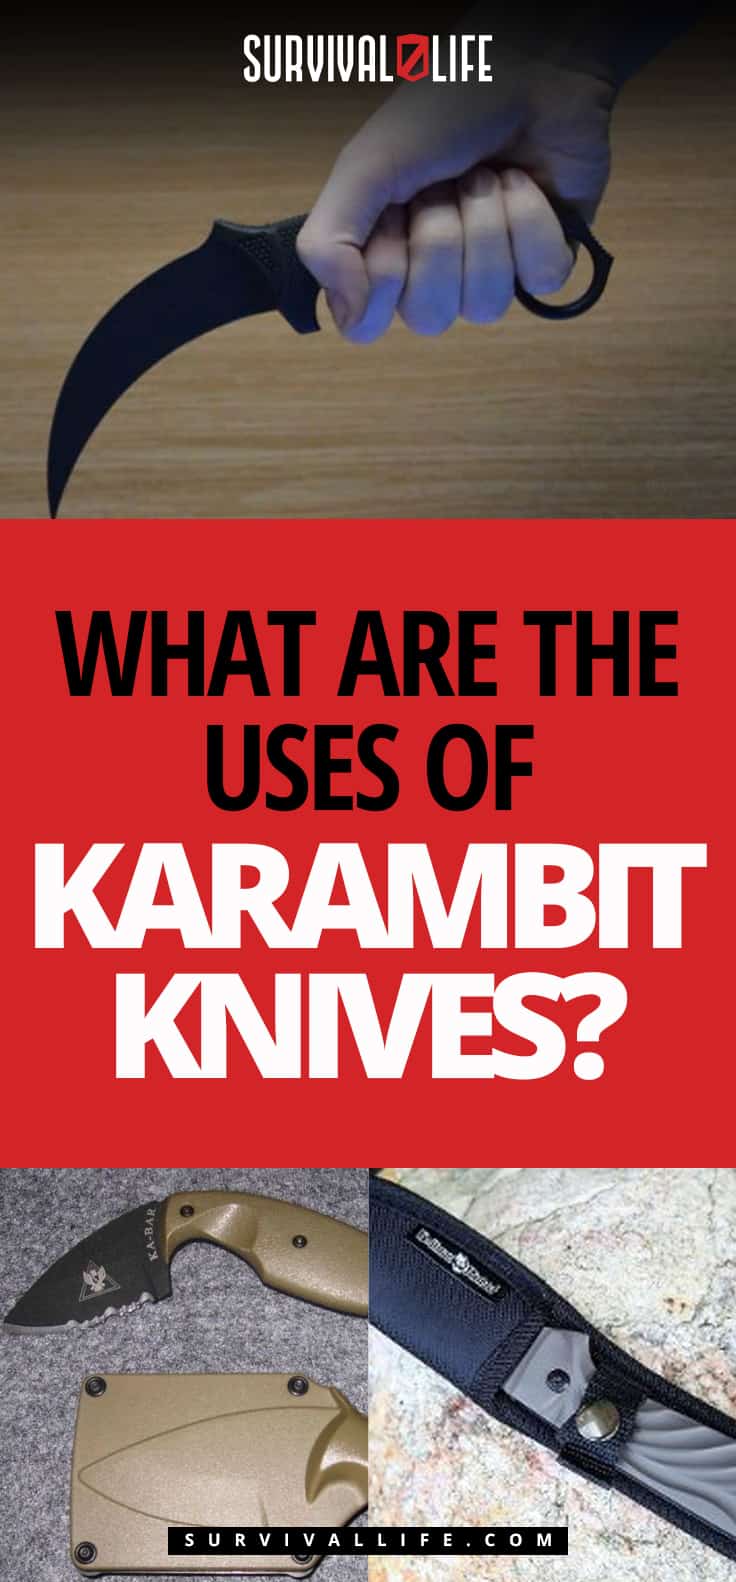 What Are The Uses Of Karambit Knives? | https://survivallife.com/karambit-knives-uses/